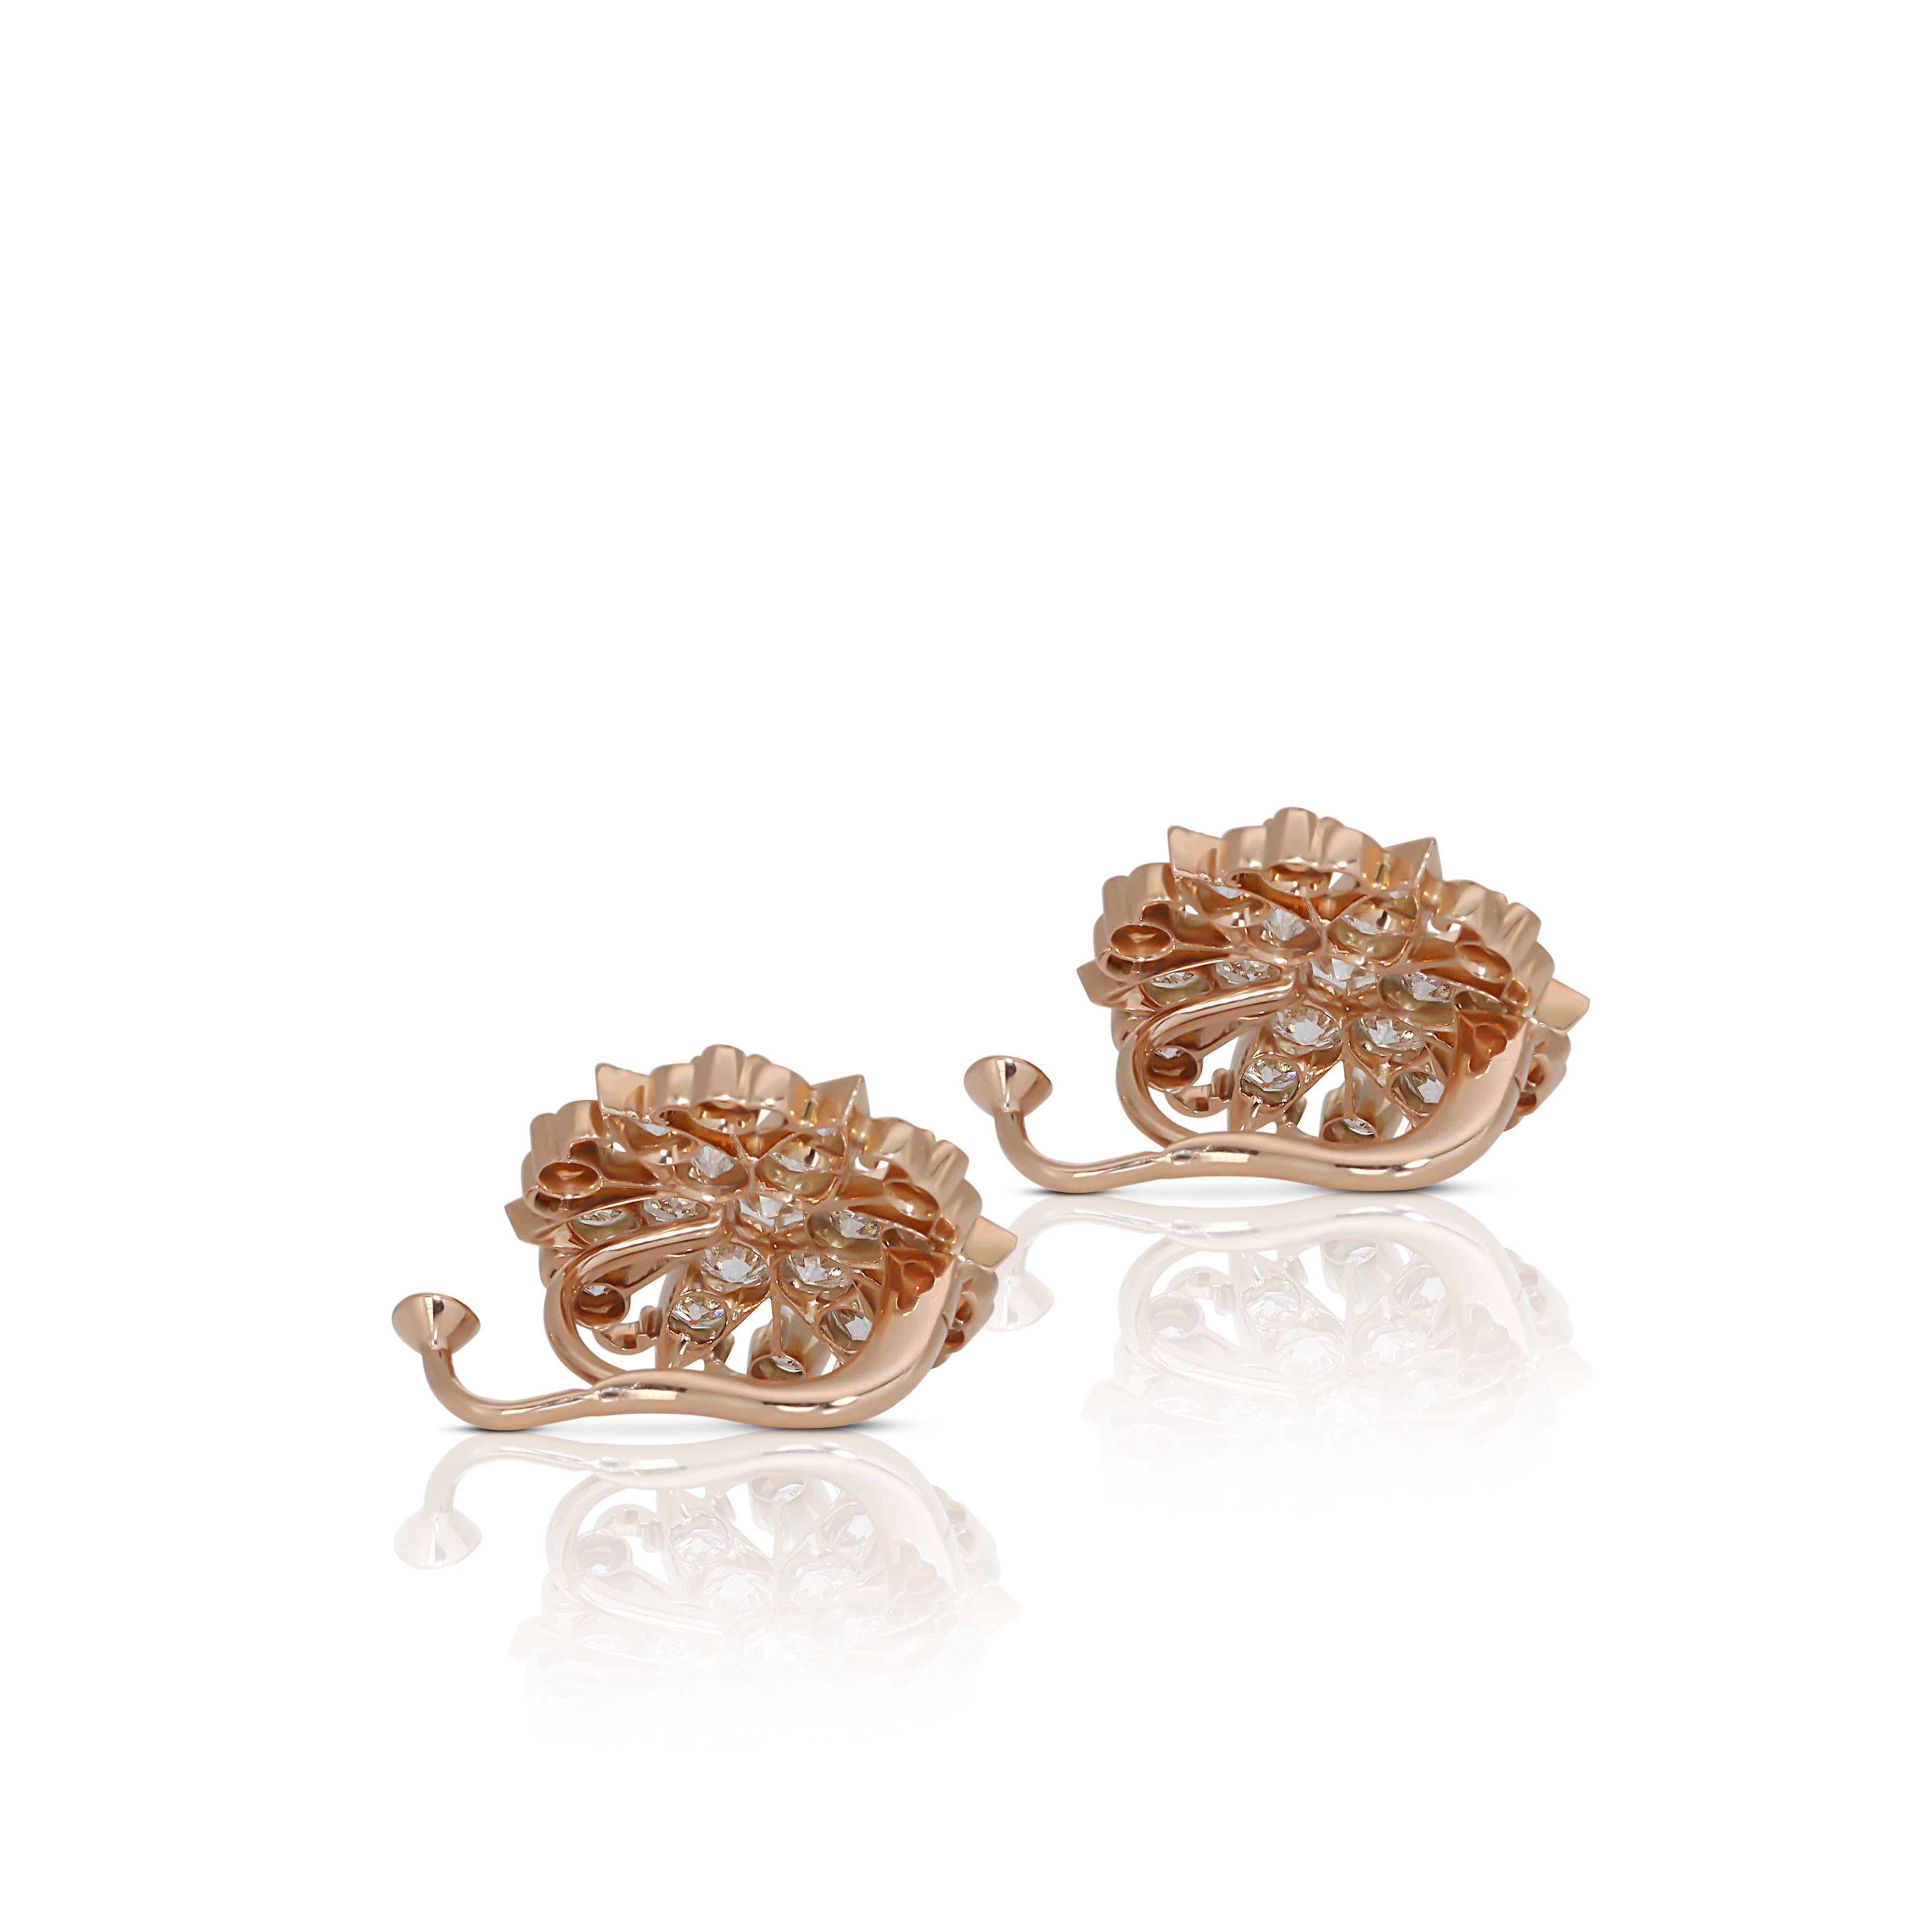 Women's Luxurious 18k Yellow Gold Cluster Earrings with 2.06 Carat of Natural Diamonds